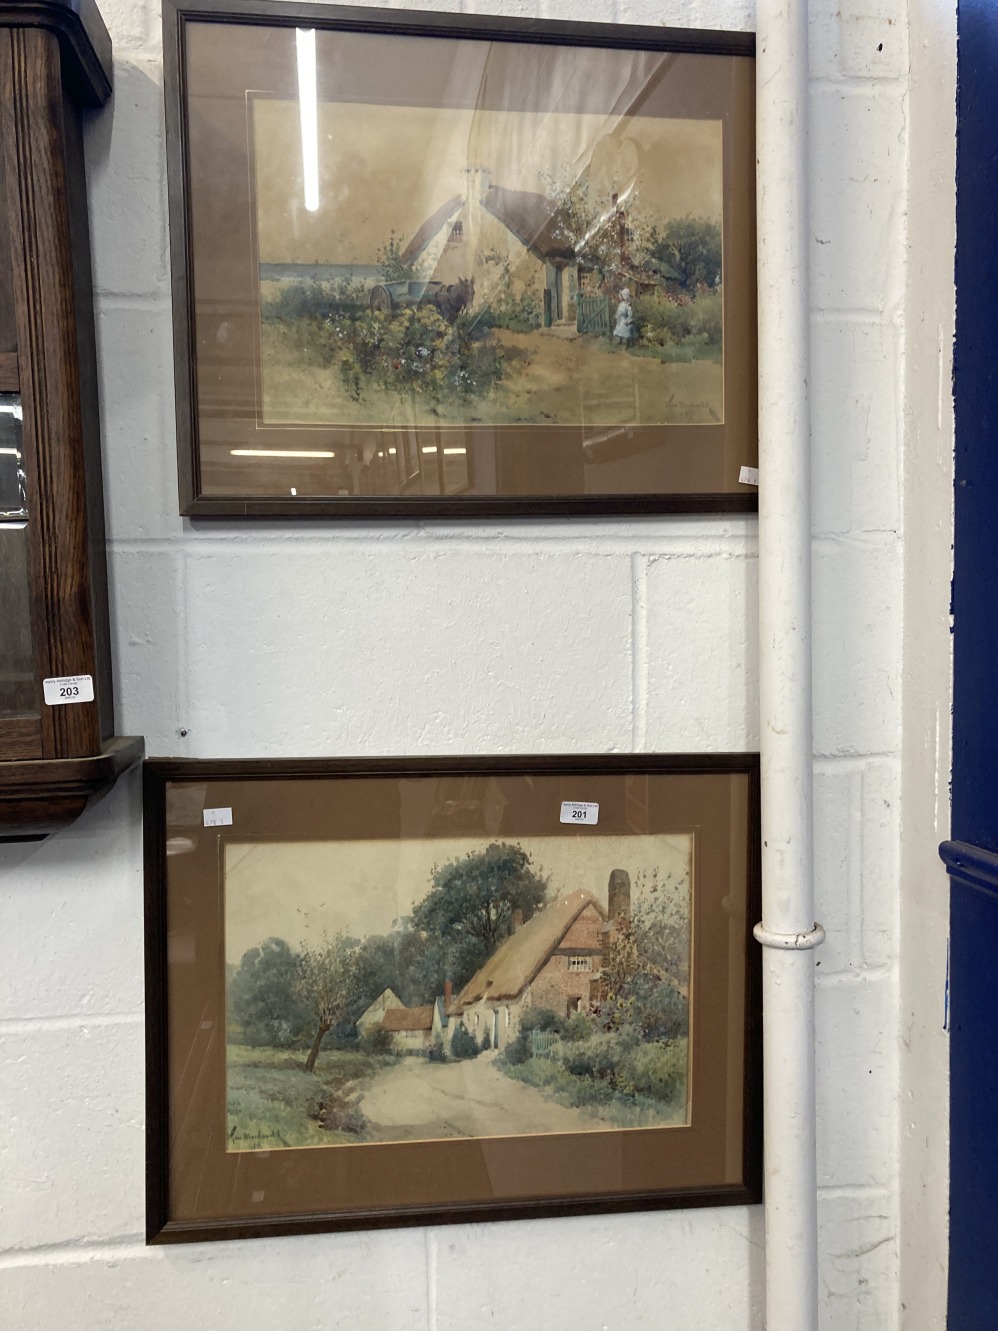 Early 20th cent. English School: Watercolours on paper, country cottages, signed MacDonald, dated